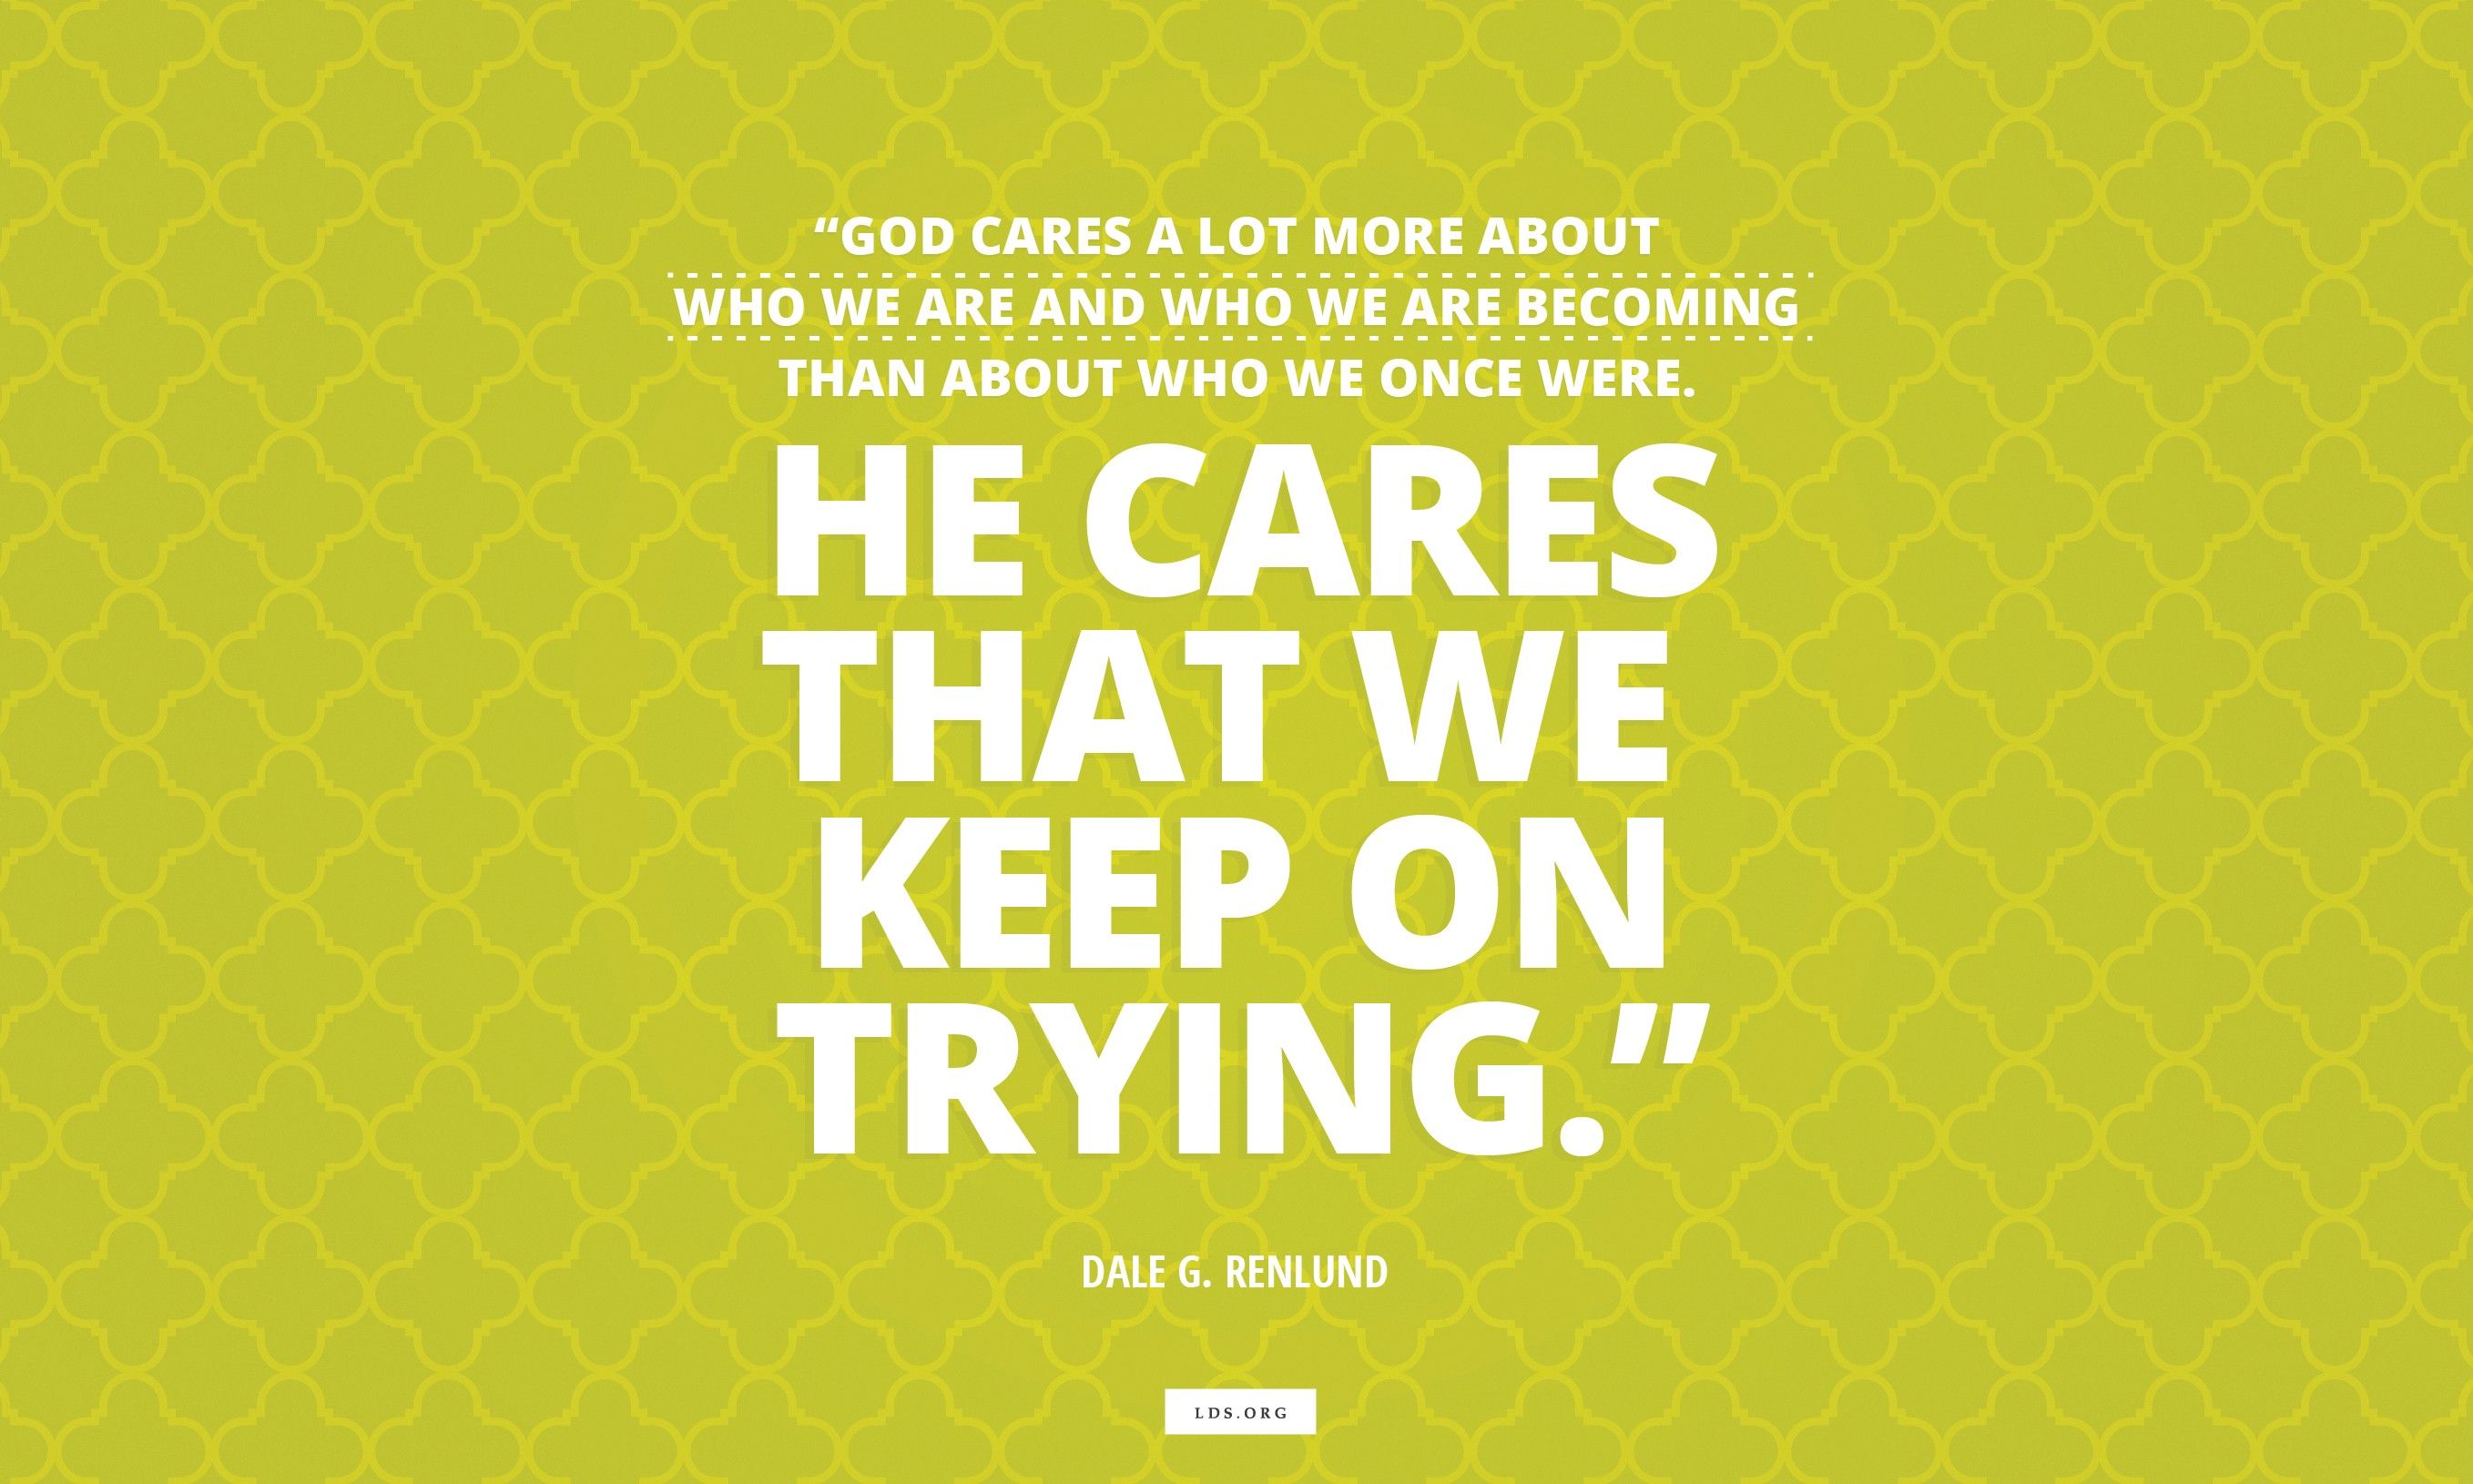 “God cares a lot more about who we are and who we are becoming than about who we once were. He cares that we keep on trying.”—Elder Dale G. Renlund, “Latter-day Saints Keep on Trying”